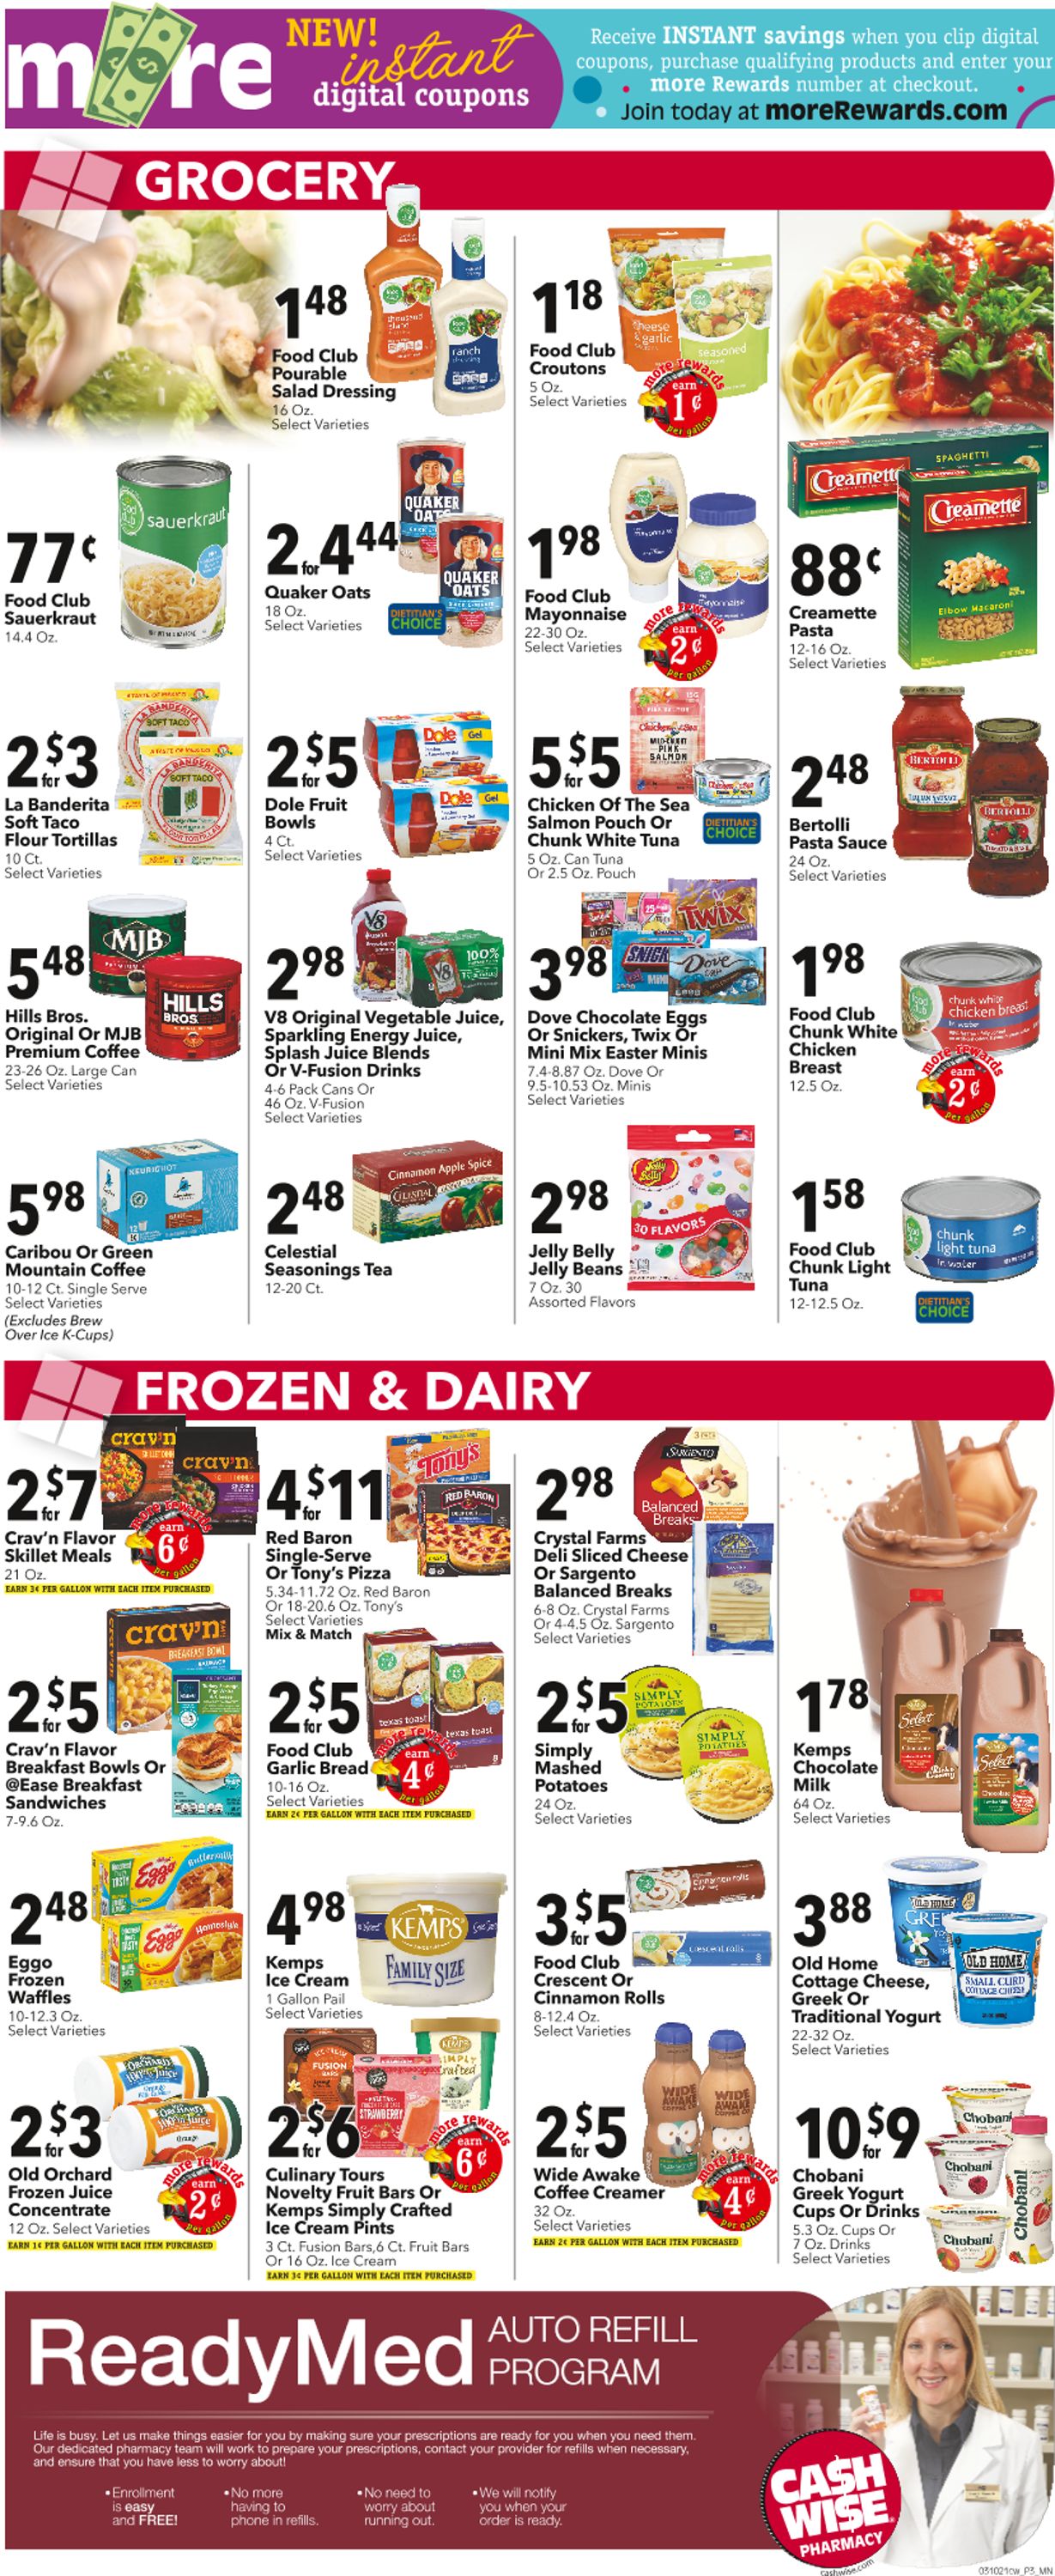 Cash Wise Weekly Ad Circular - valid 03/10-03/16/2021 (Page 3)